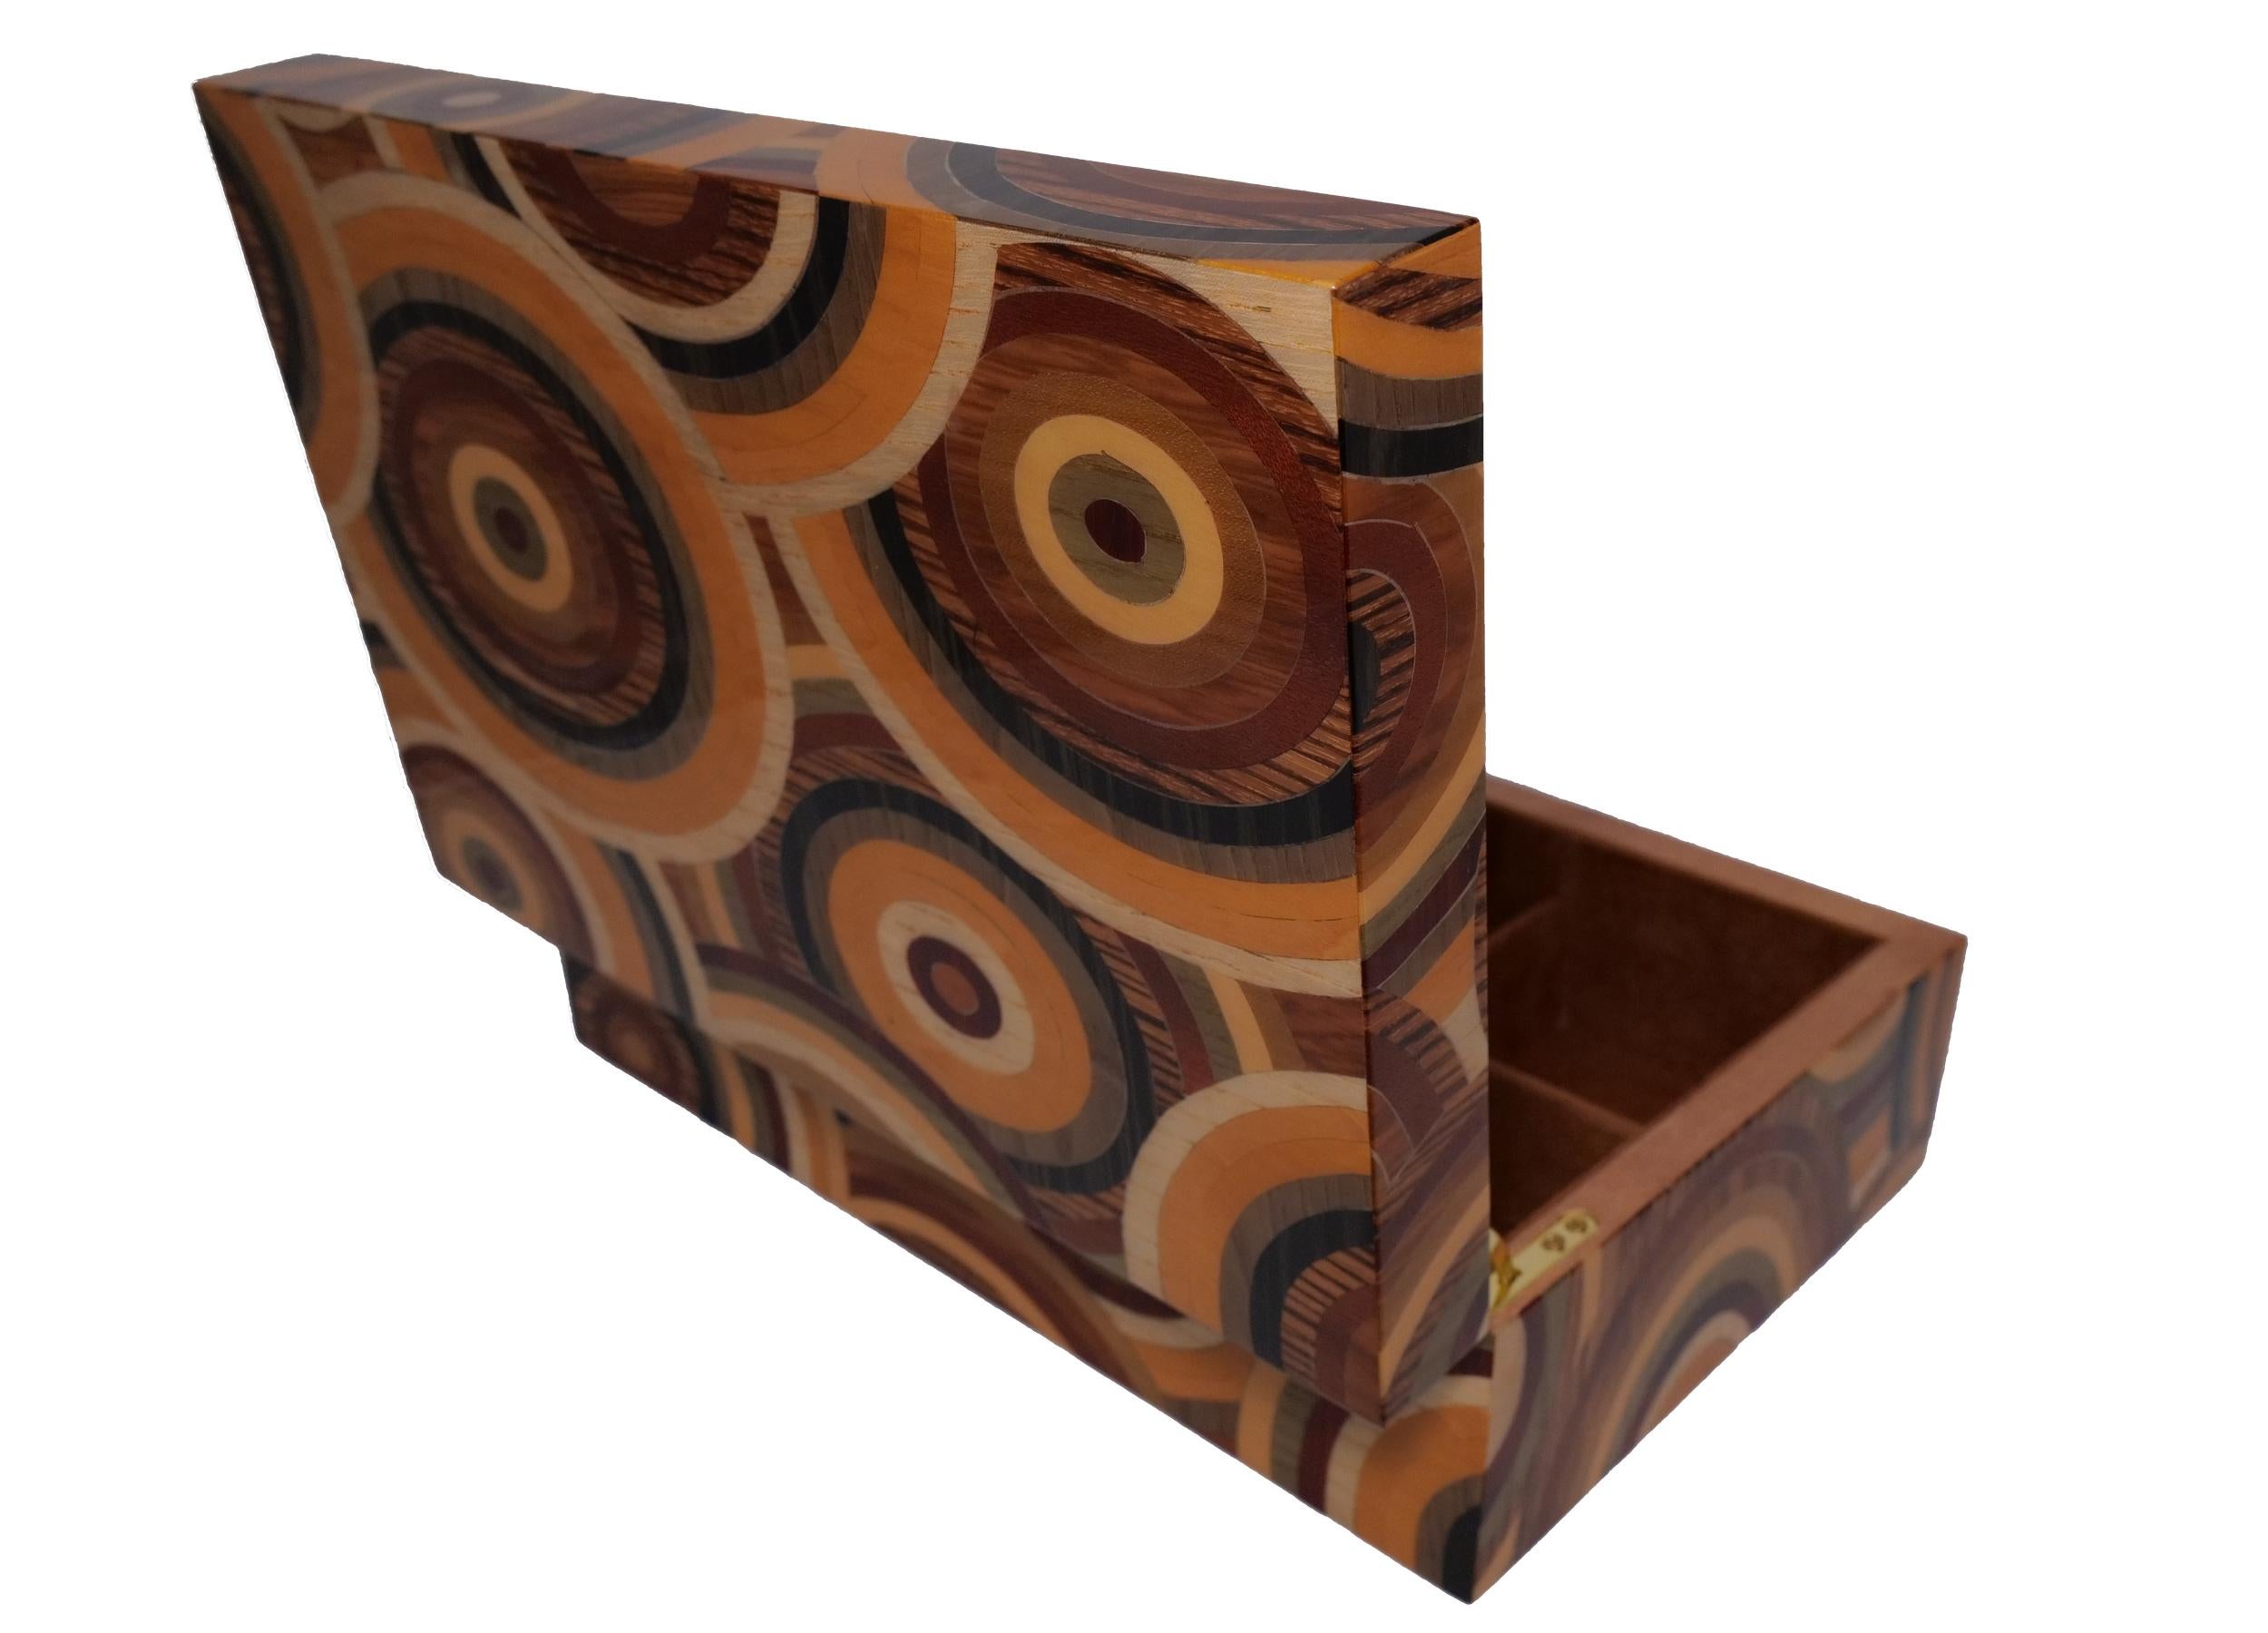 - Handmade for us by a fourth generation artisan in Sorrento, Italy
- A timeless heirloom that will be treasured forever.
- Each piece of wood has hand cut to create this unique geometric pattern
- The Rosewood has been inlaid with Ashwood,